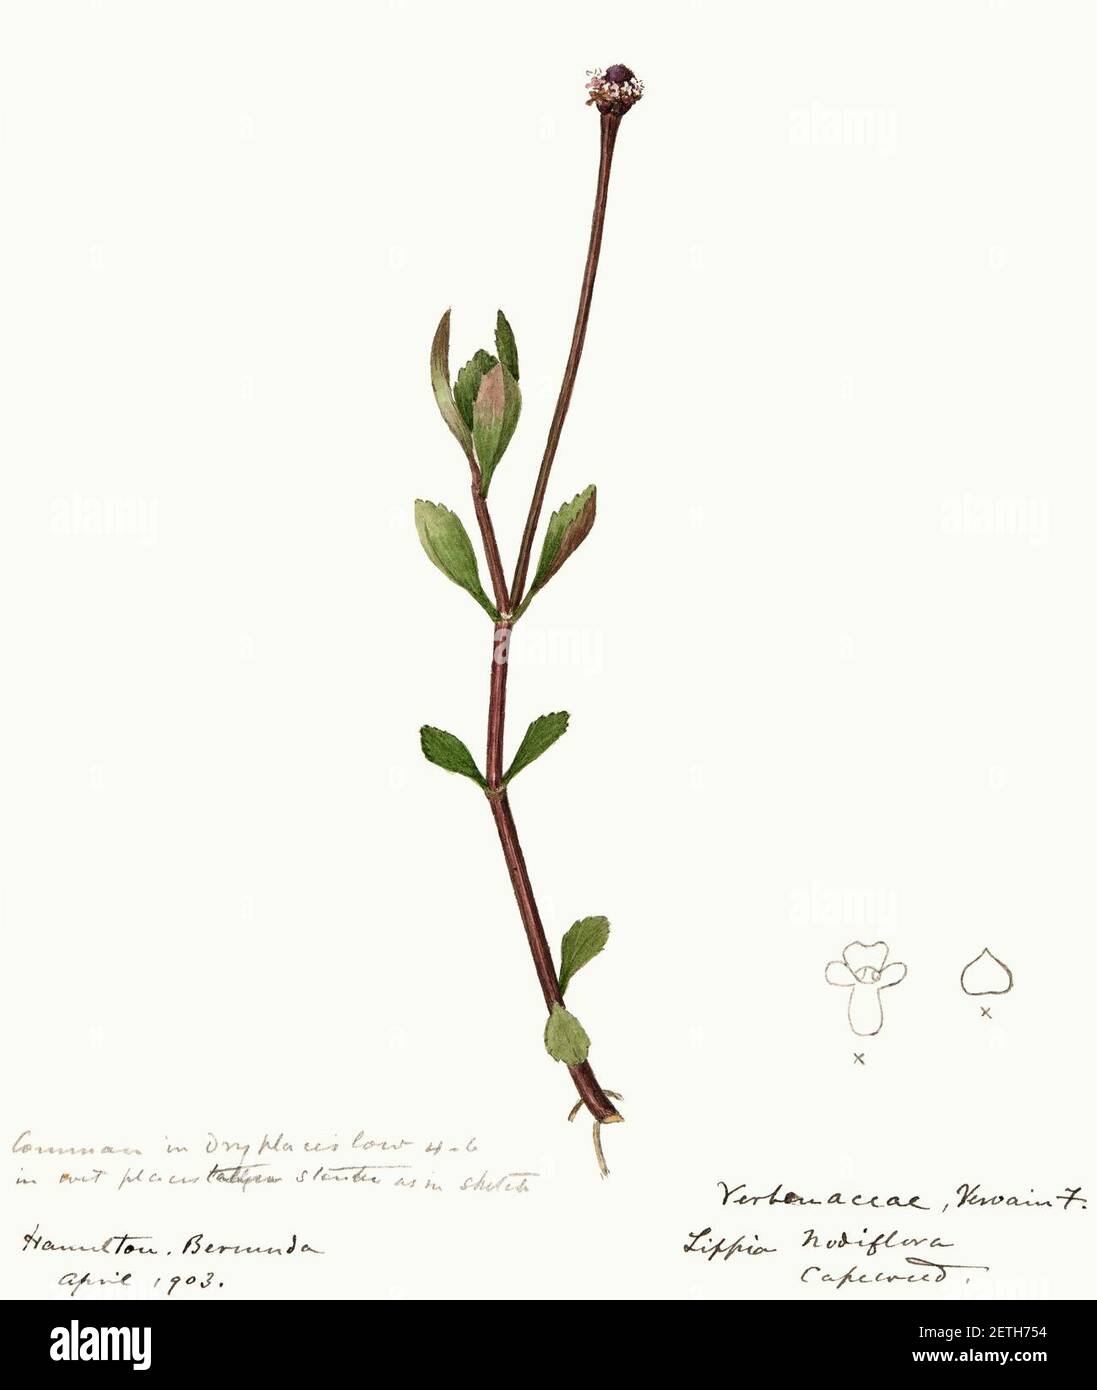 Phyla nodiflora - Water-color Sketches of Plants of North America - Vol. 18 - p. 36. Stock Photo